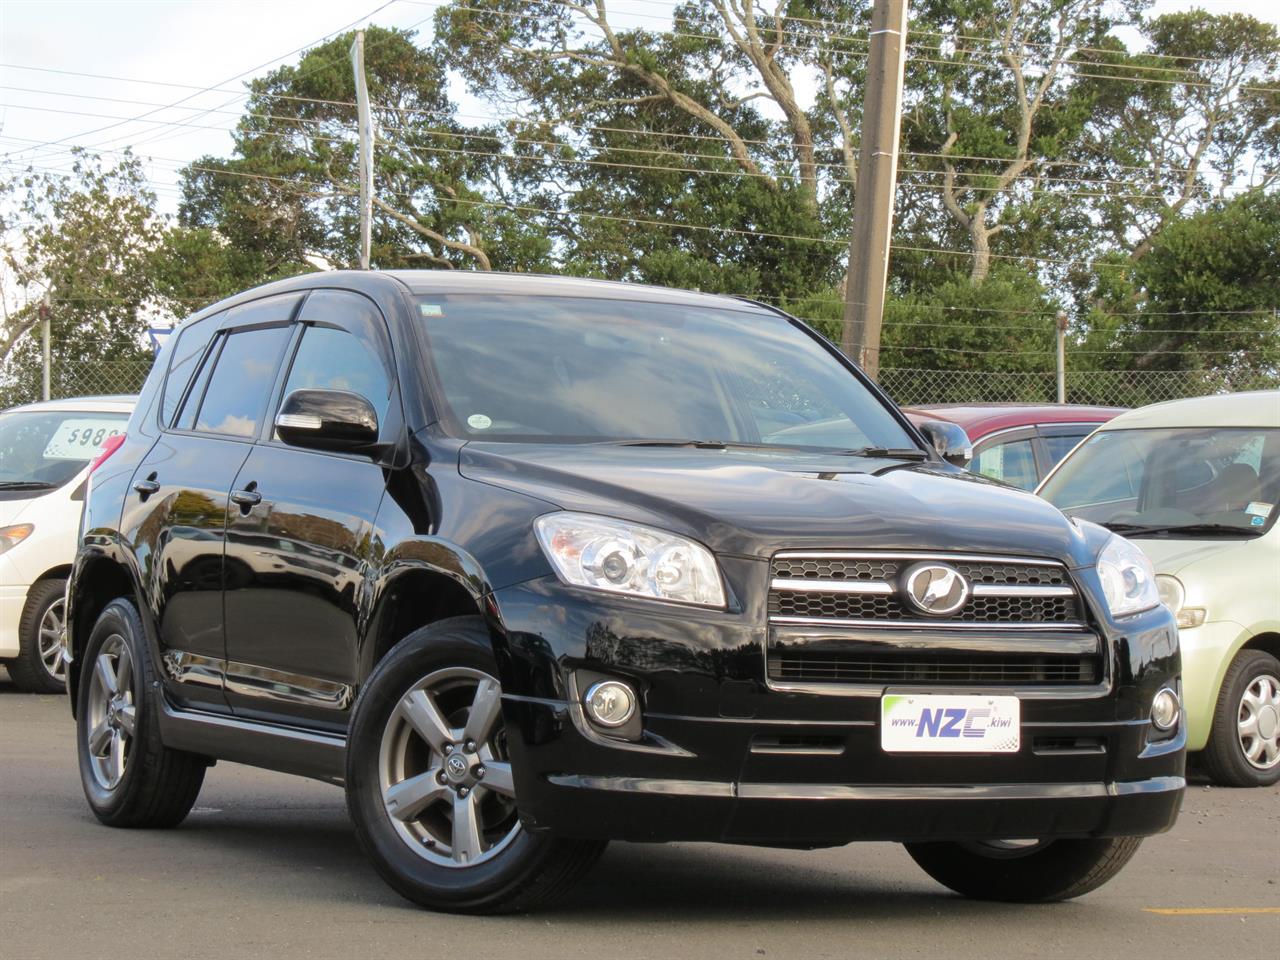 NZC 2013 Toyota RAV4 just arrived to Auckland